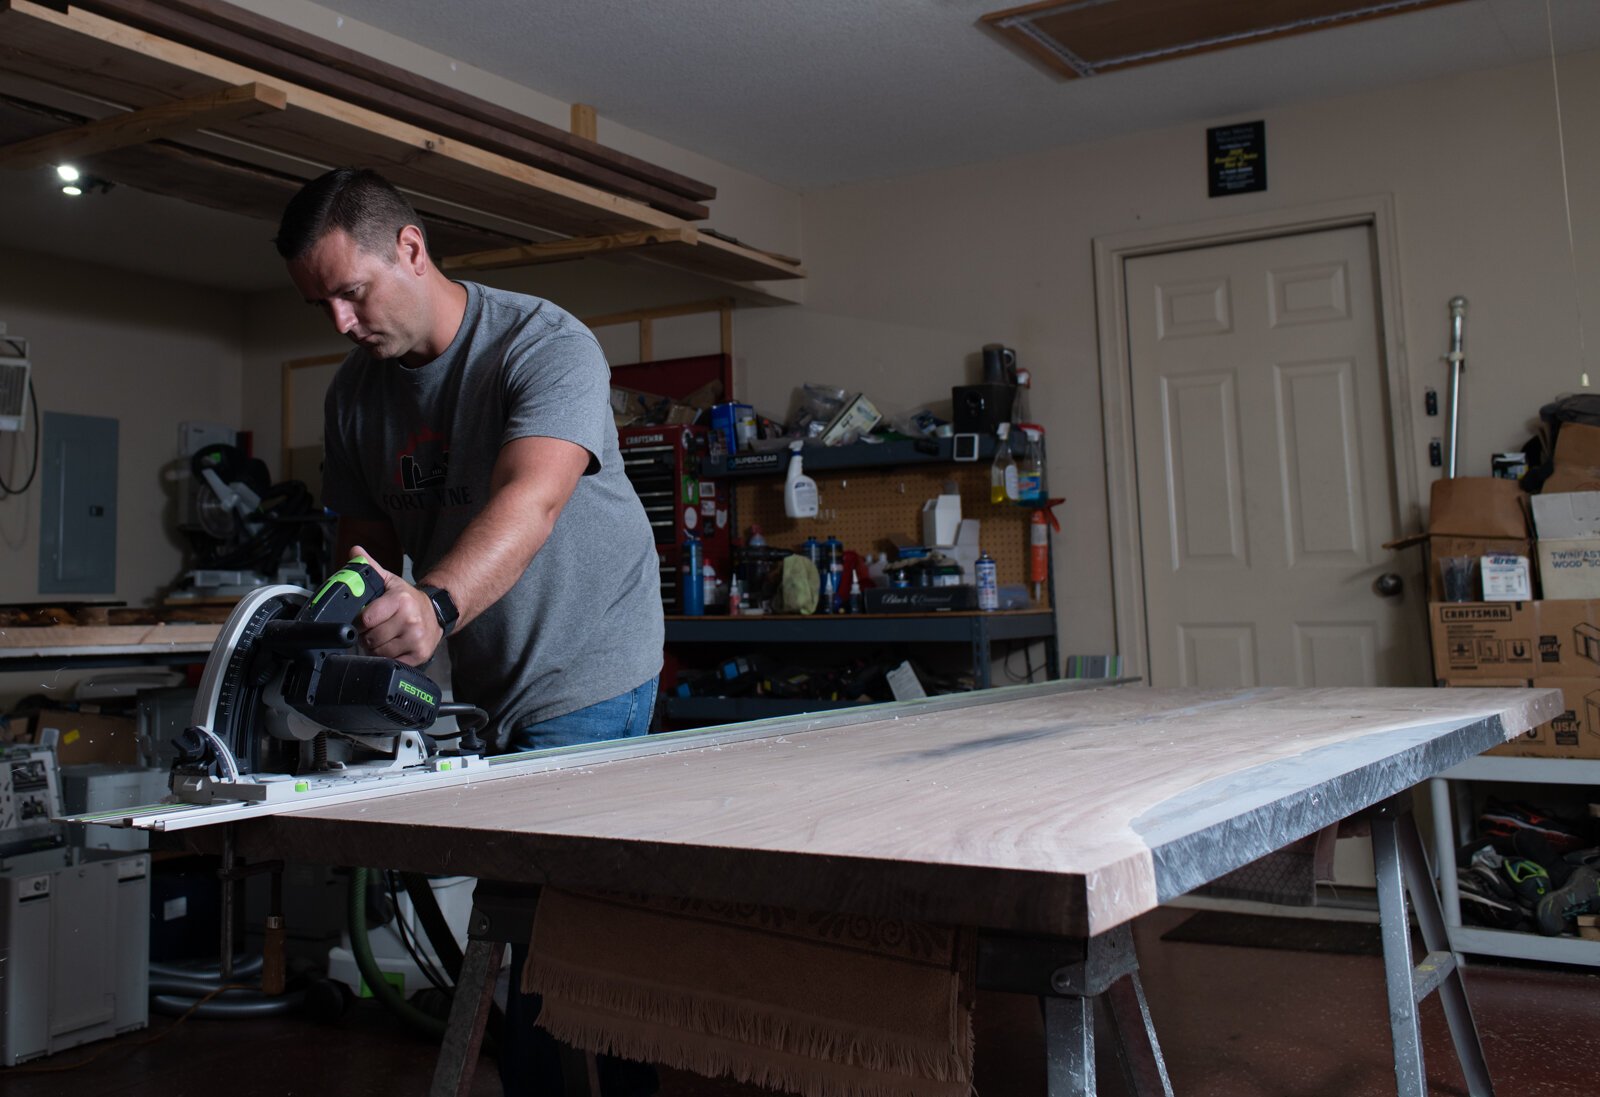 Lee Hoffmeier of Fort Wayne Industrial Revolution works on cutting a black walnut table to size for a client in Detroit in his home in Fort Wayne.